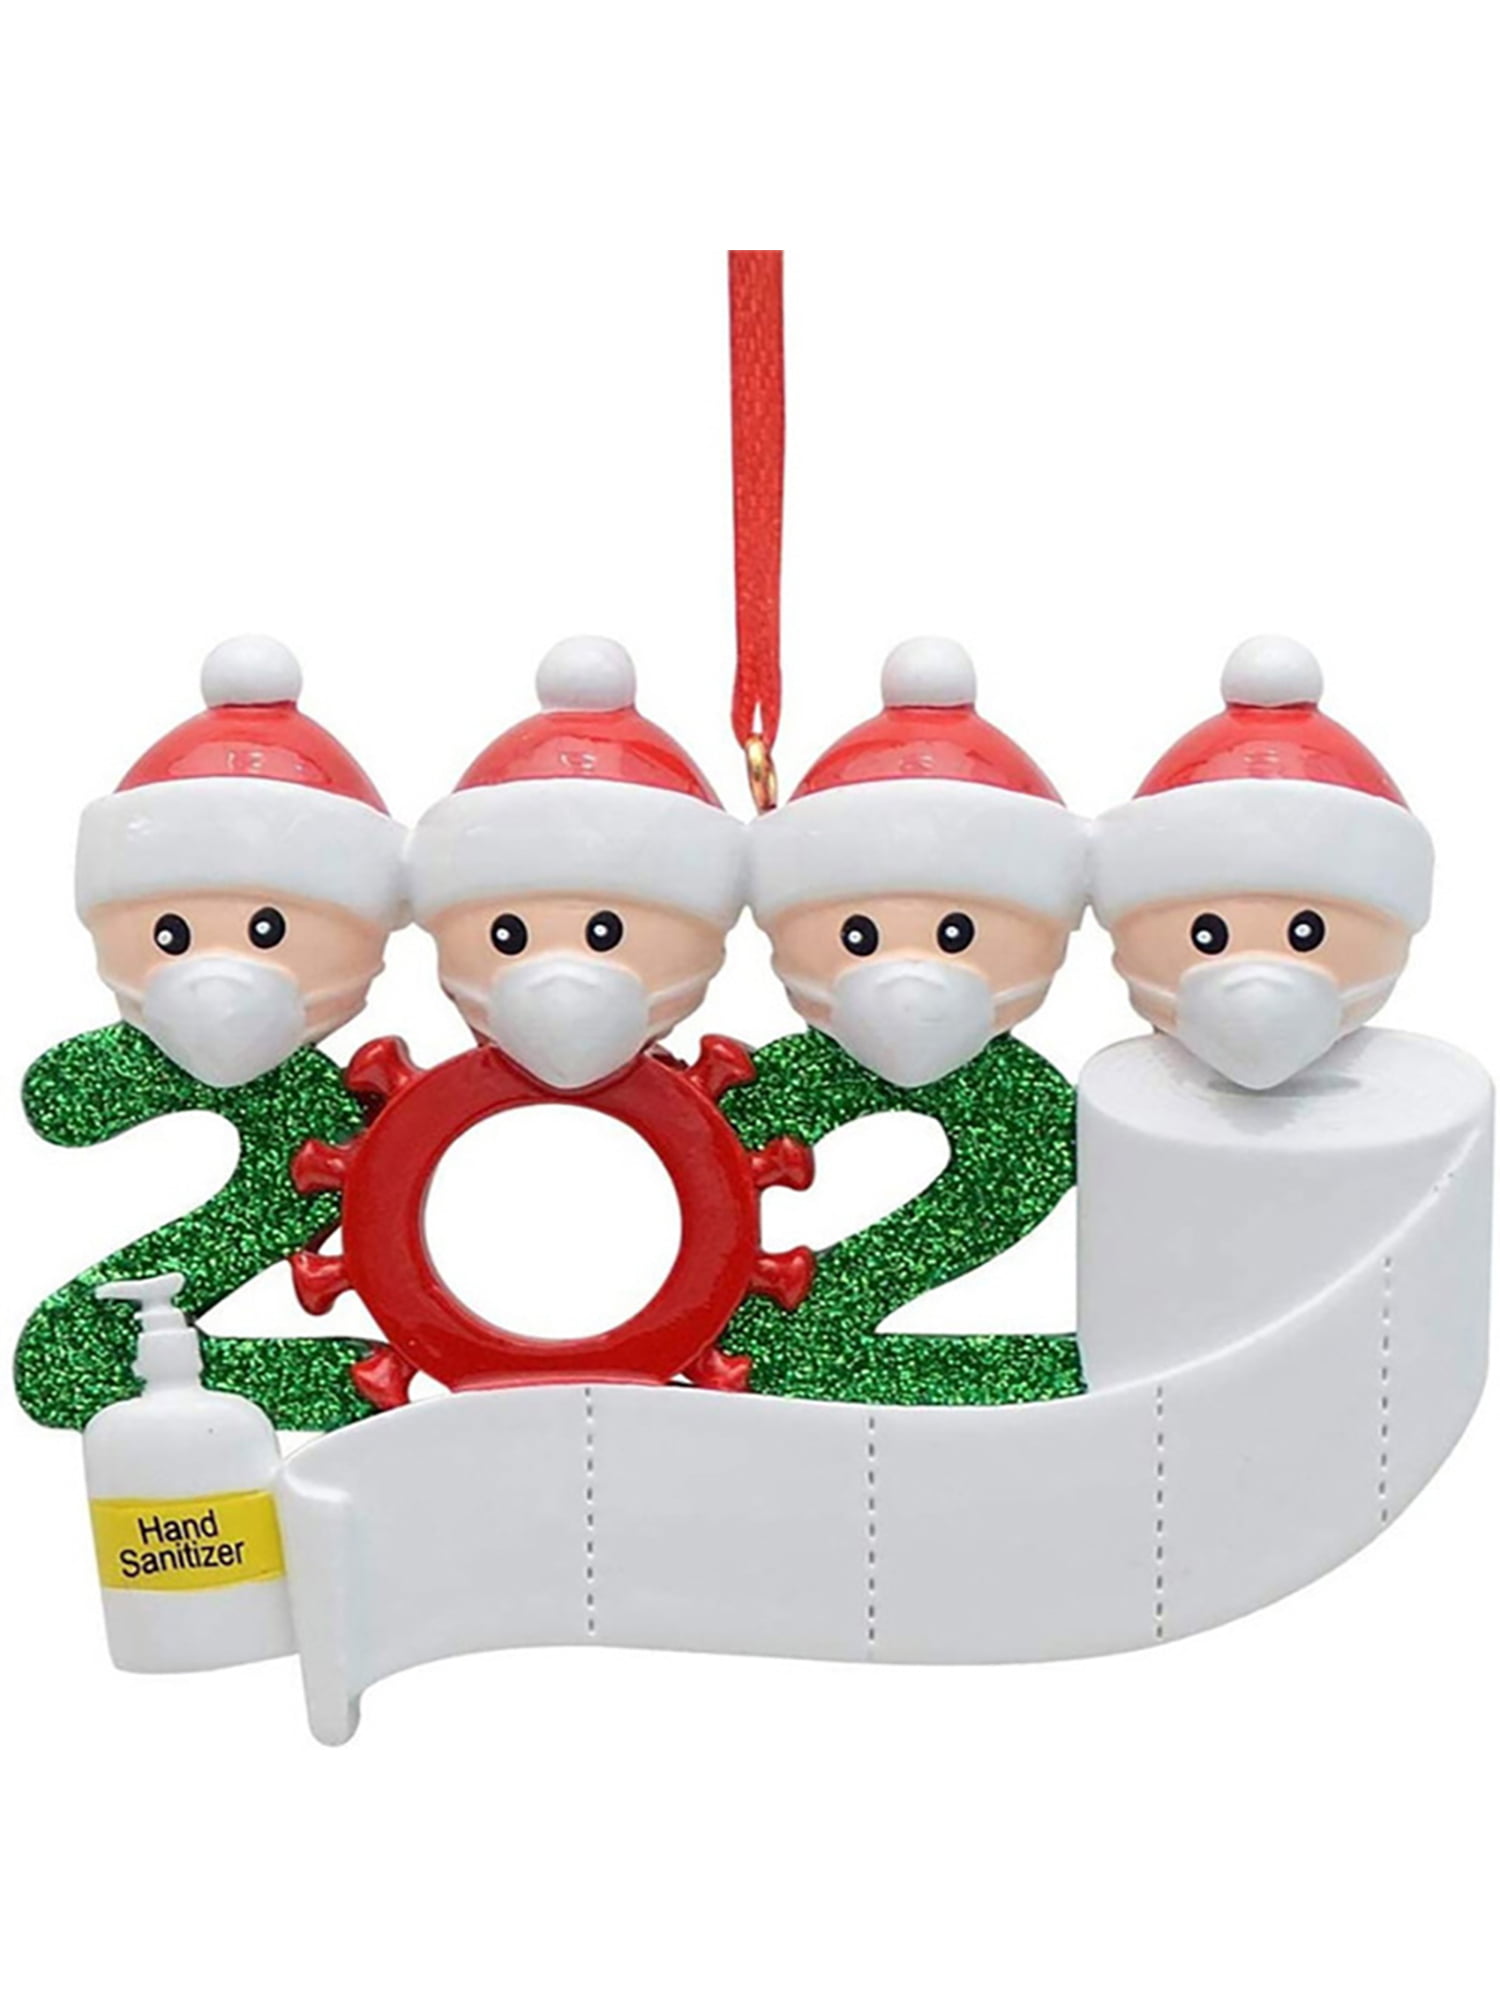 2020 Marry Christmas Hanging Ornaments Family Personal Ornament Decor 